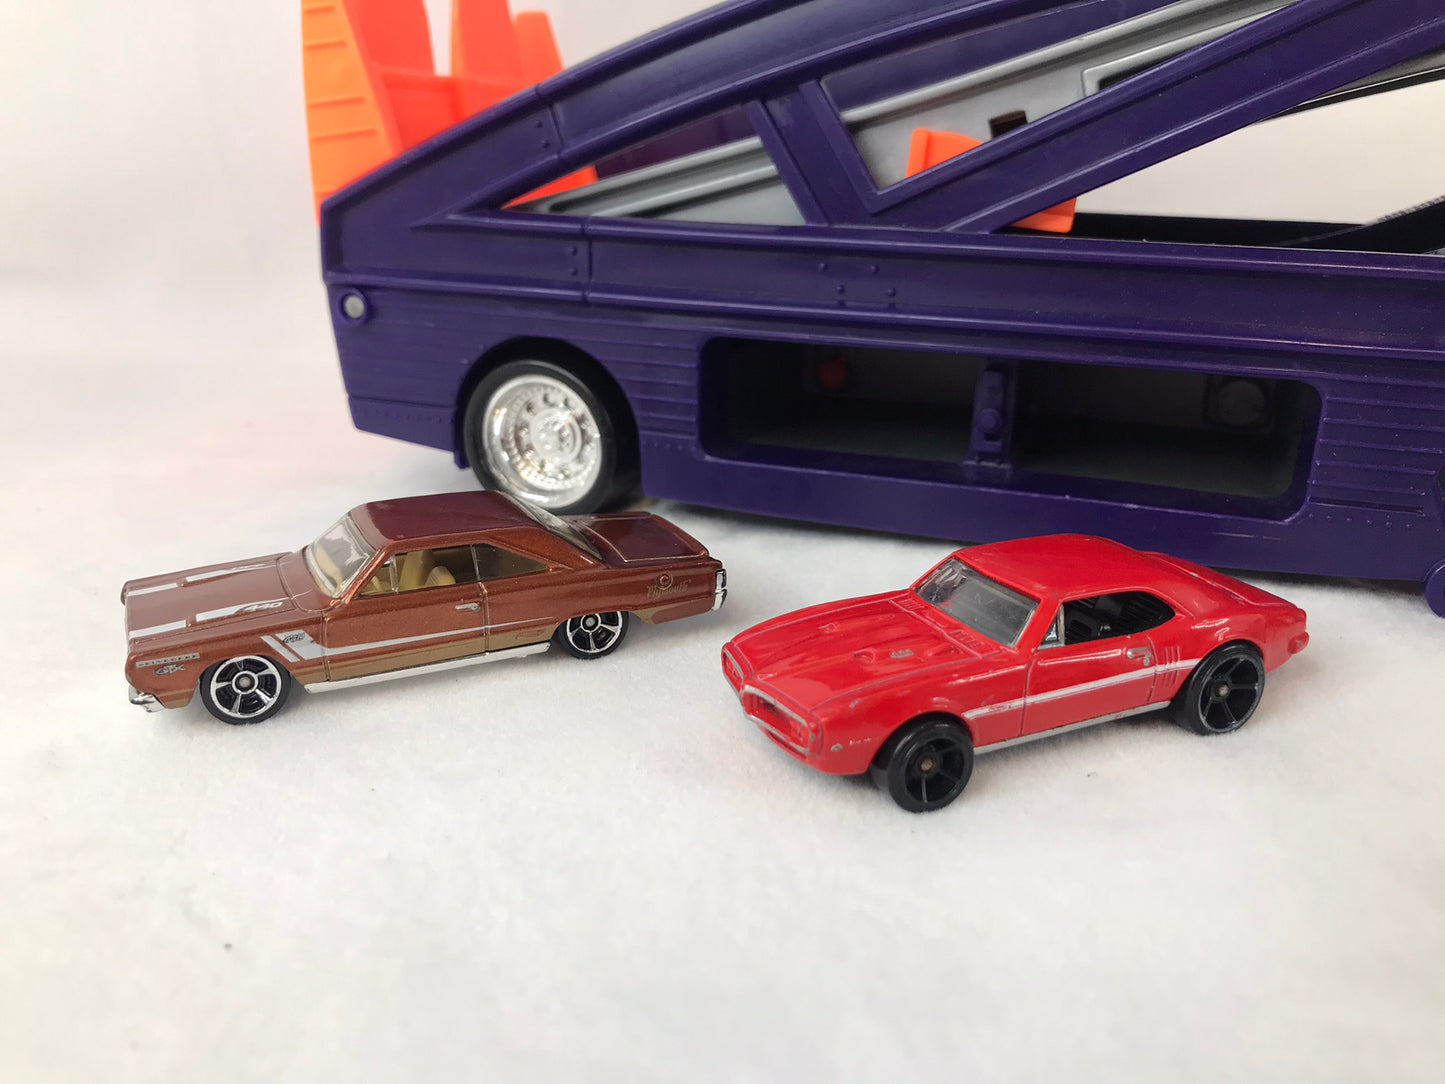 Hot Wheels and Die Cast Cars With Large Car Carrier Truck Purple Orange